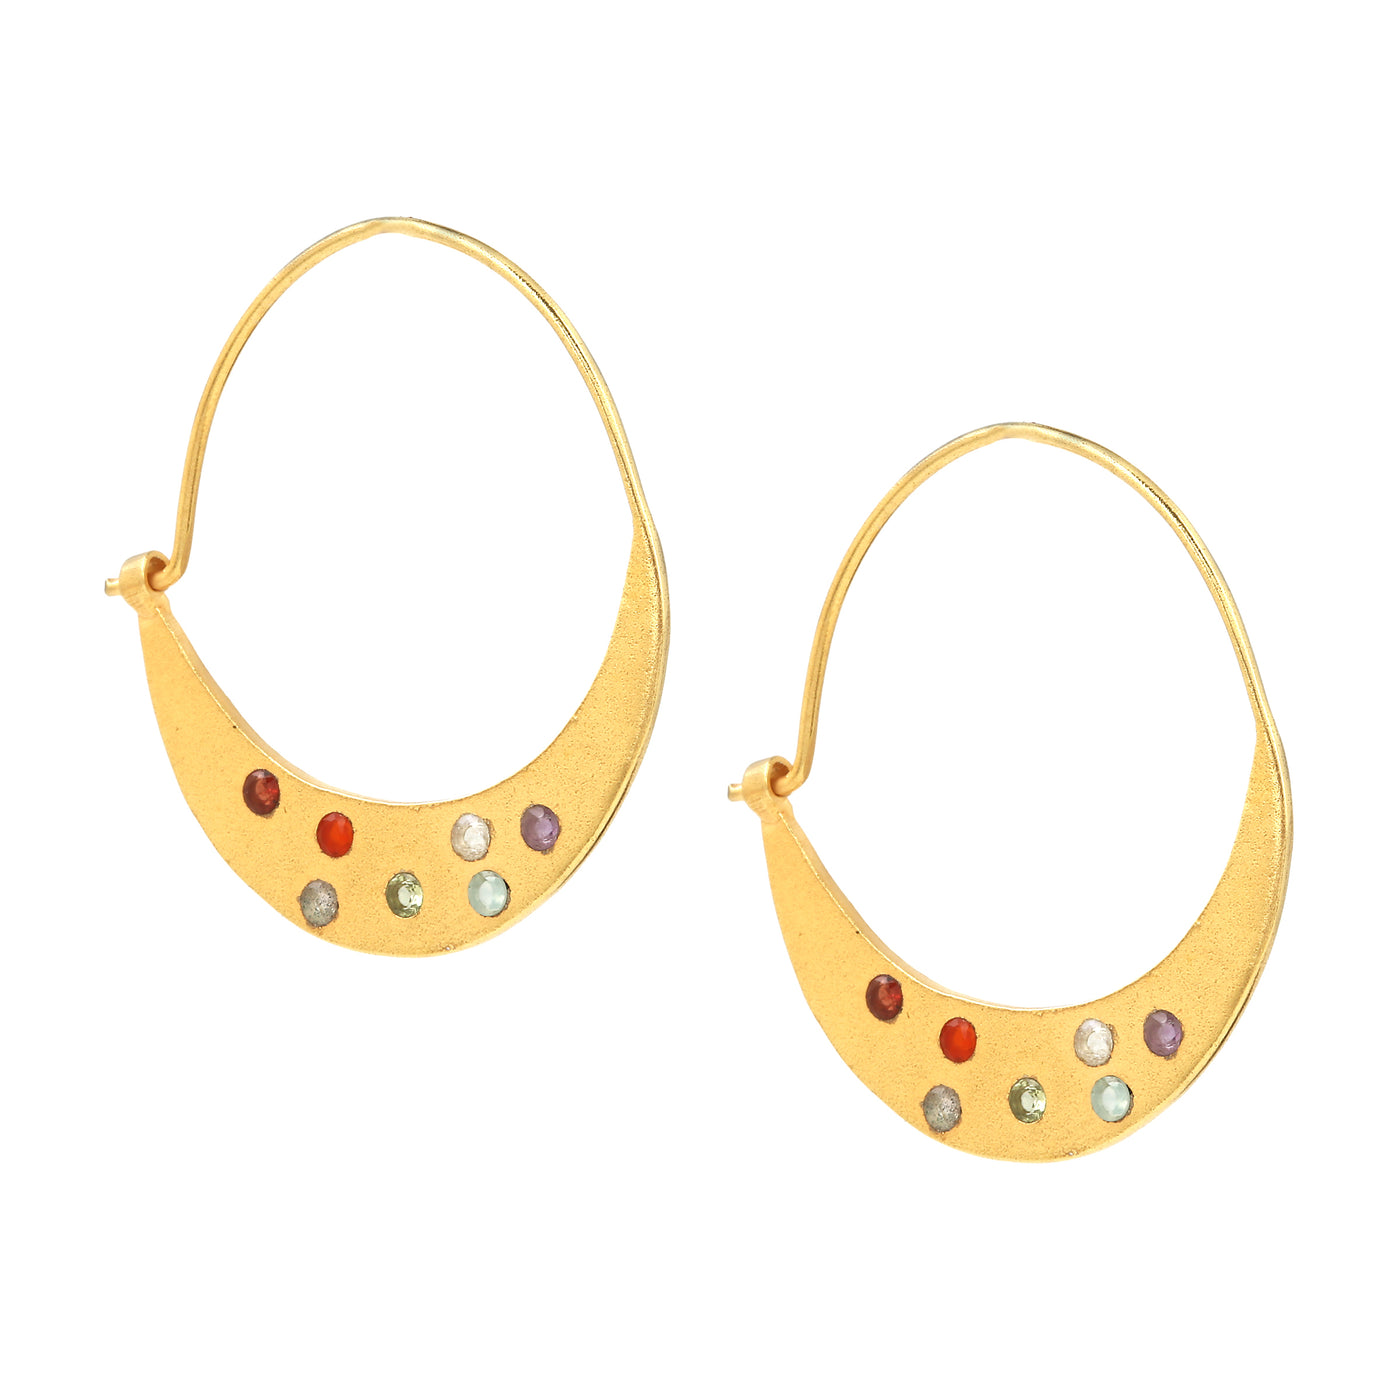 Omi handcrafted earrings, gold plated, silver, minimal jewellery, semi precious stone